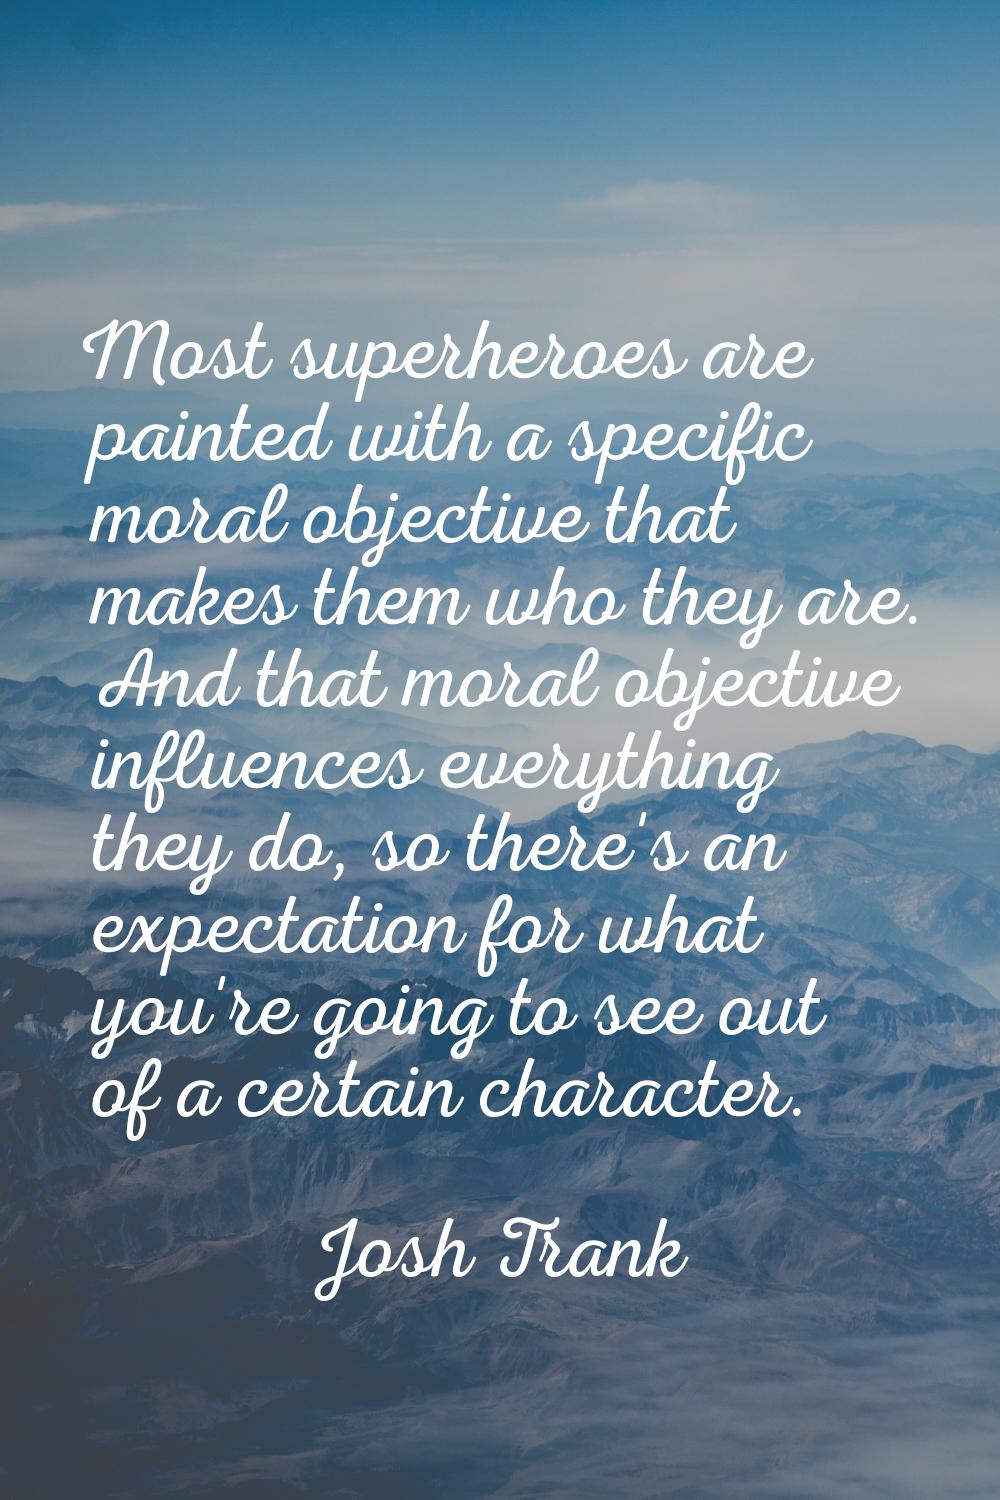 Most superheroes are painted with a specific moral objective that makes them who they are. And that